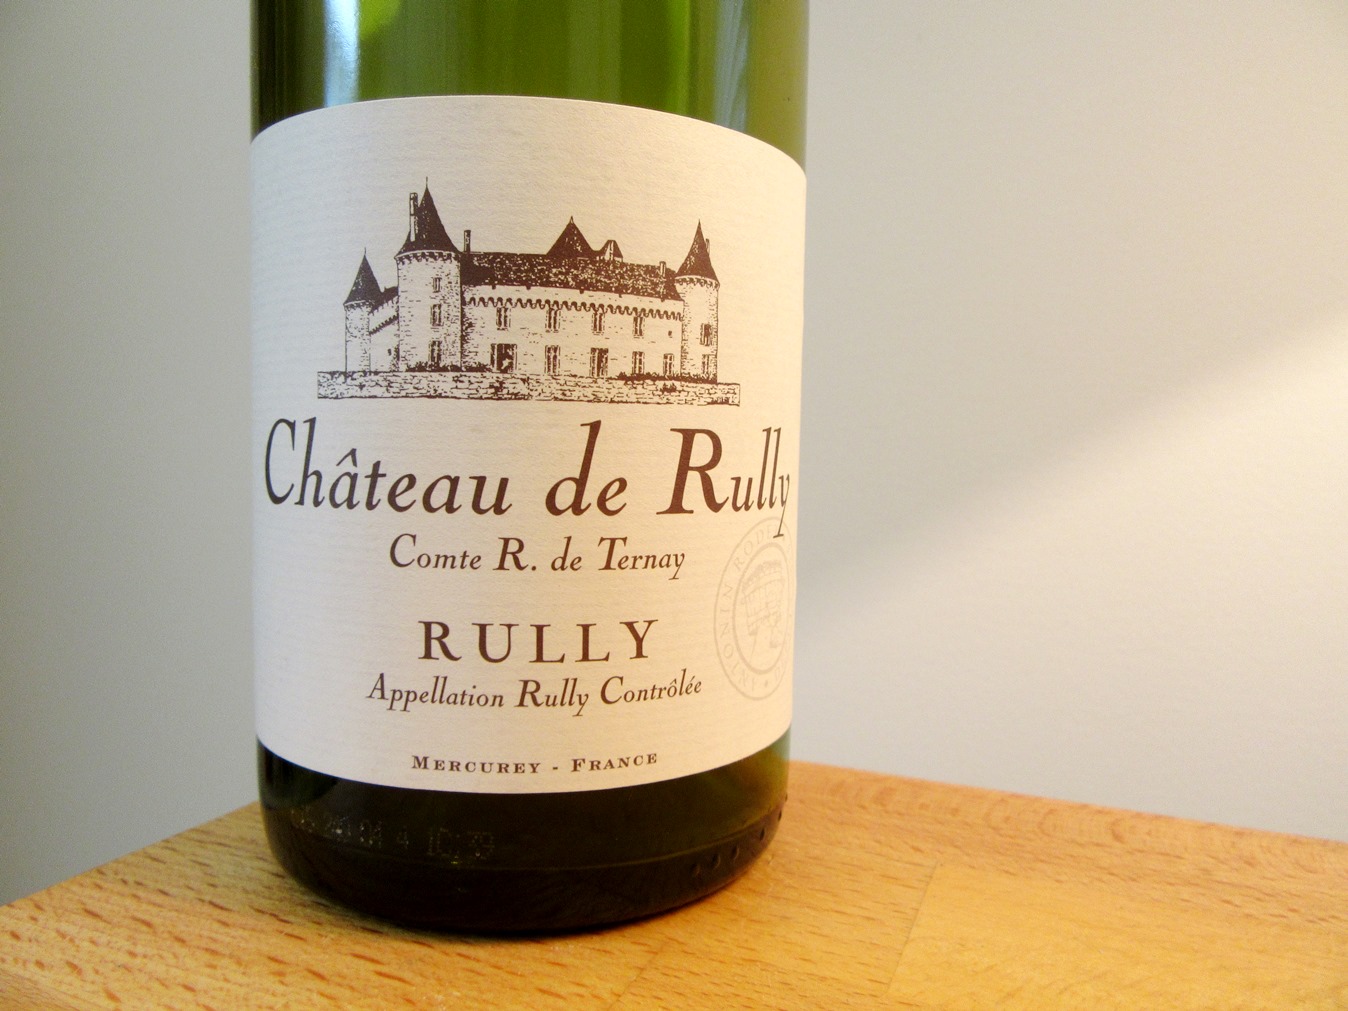 Antonin Rodet, Chateau de Rully Blanc 2013, Cote Chalonnaise, Burgundy, France, Wine Casual